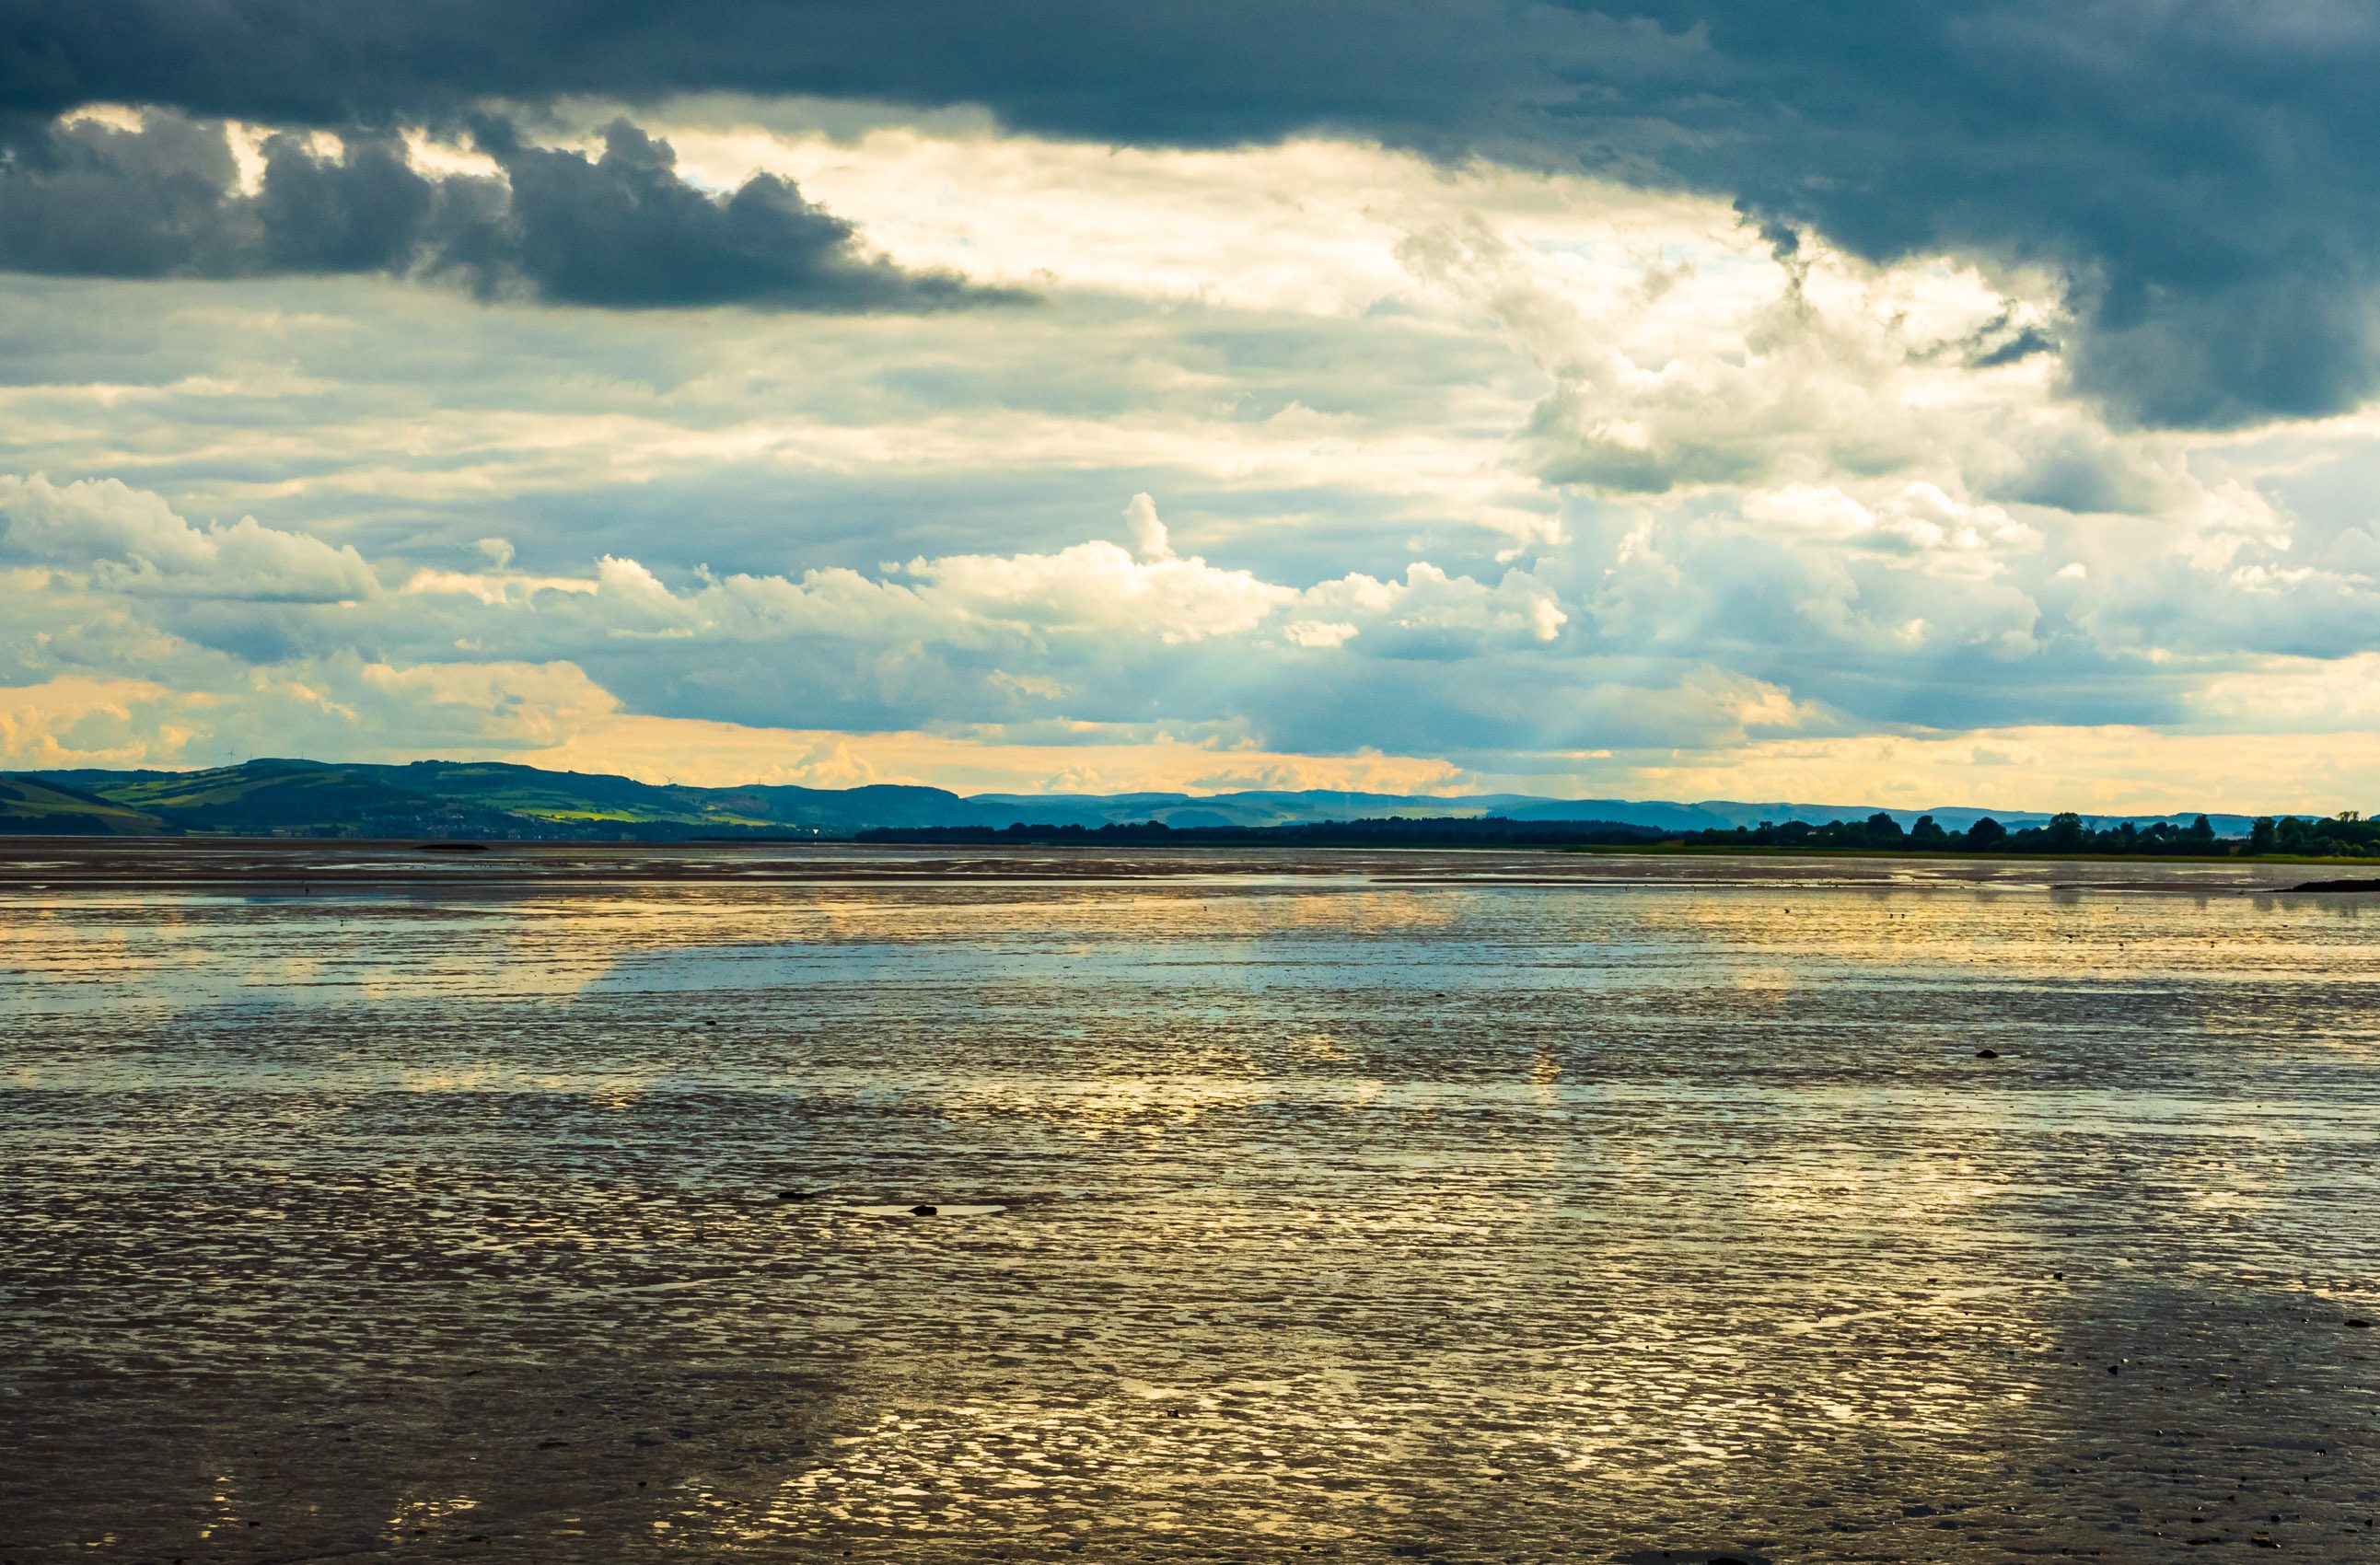 Reflection of a dramatic sky on Tay mudflats at low tide, Invergowrie, Scotland. DD101